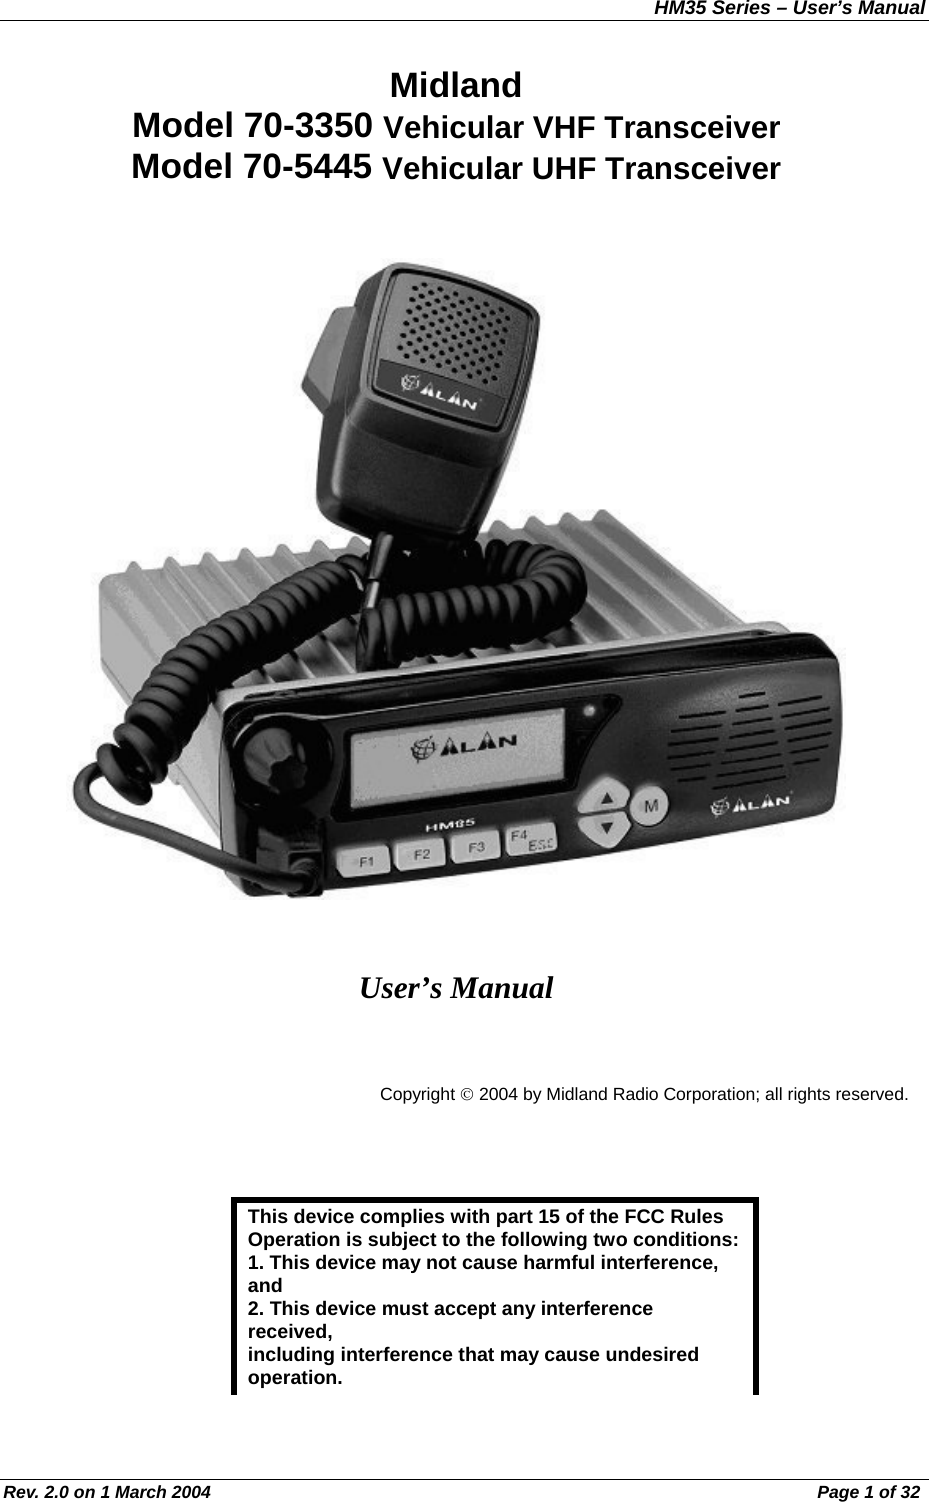 HM35 Series – User’s Manual Rev. 2.0 on 1 March 2004  Page 1 of 32 Midland  Model 70-3350 Vehicular VHF Transceiver Model 70-5445 Vehicular UHF Transceiver       User’s Manual   Copyright © 2004 by Midland Radio Corporation; all rights reserved.   This device complies with part 15 of the FCC Rules Operation is subject to the following two conditions: 1. This device may not cause harmful interference, and 2. This device must accept any interference received, including interference that may cause undesired operation. 